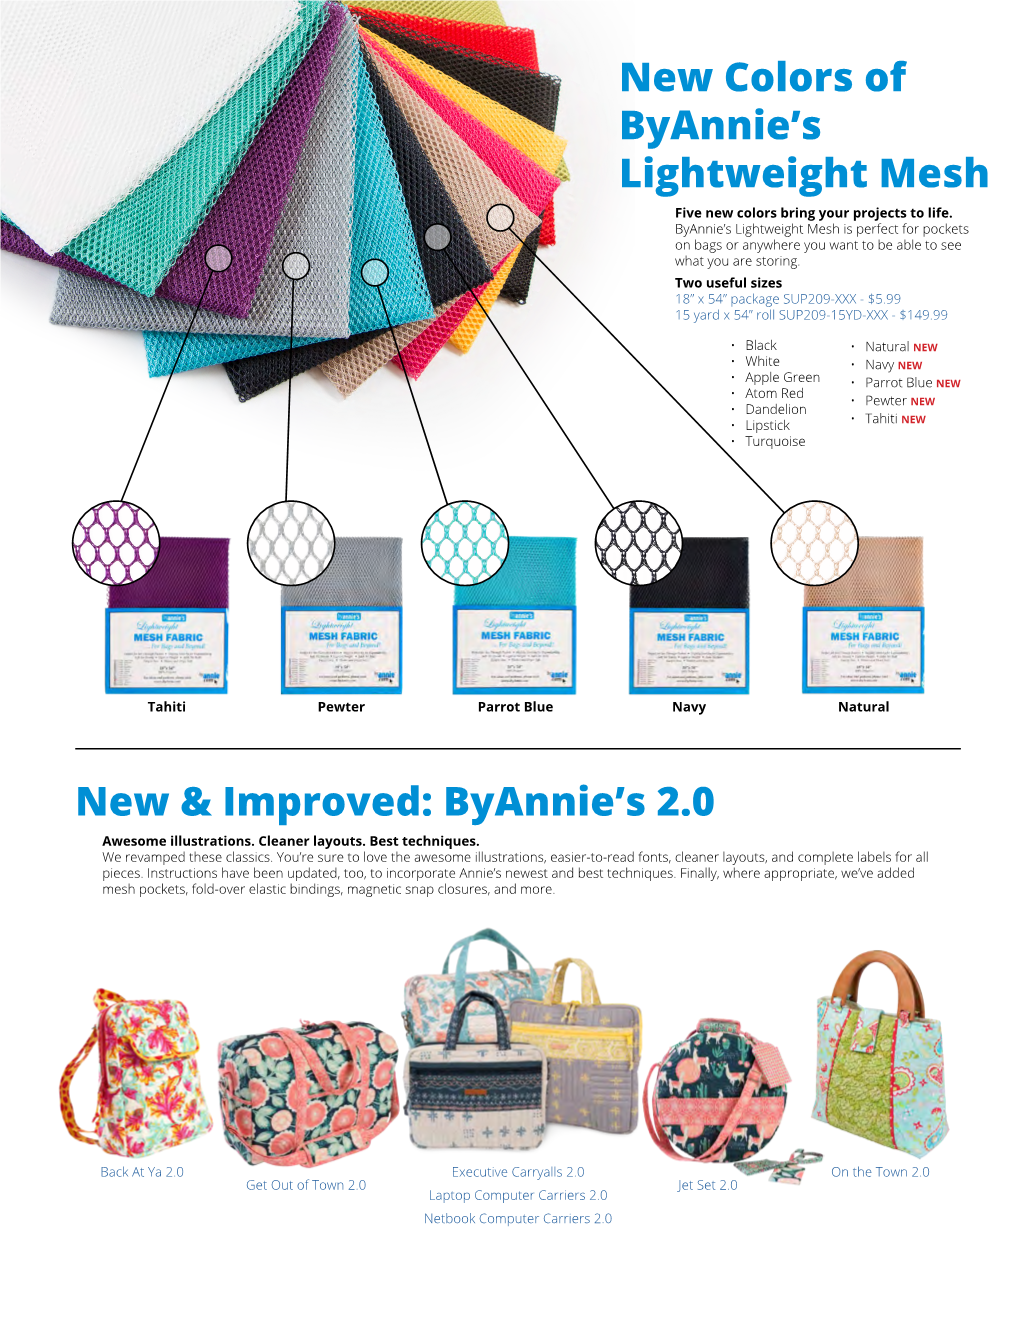 New Colors of Byannie's Lightweight Mesh New & Improved: Byannie's